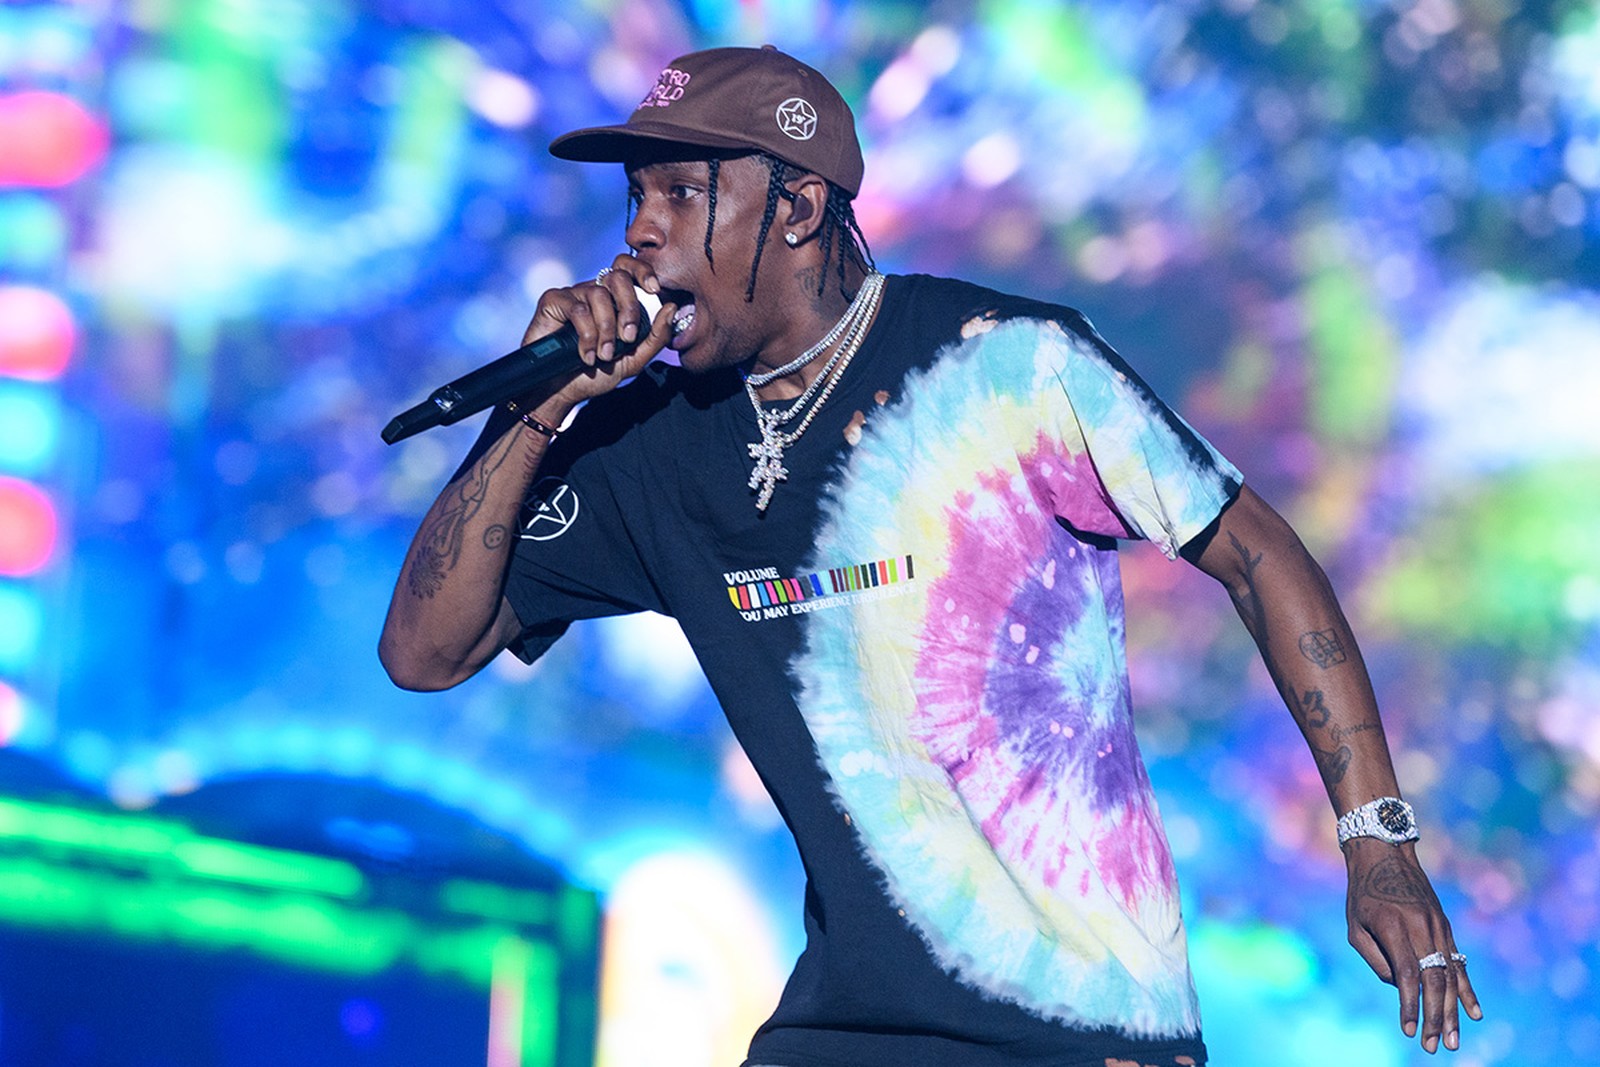 Houston police warned Travis Scott about crowd before the concert started